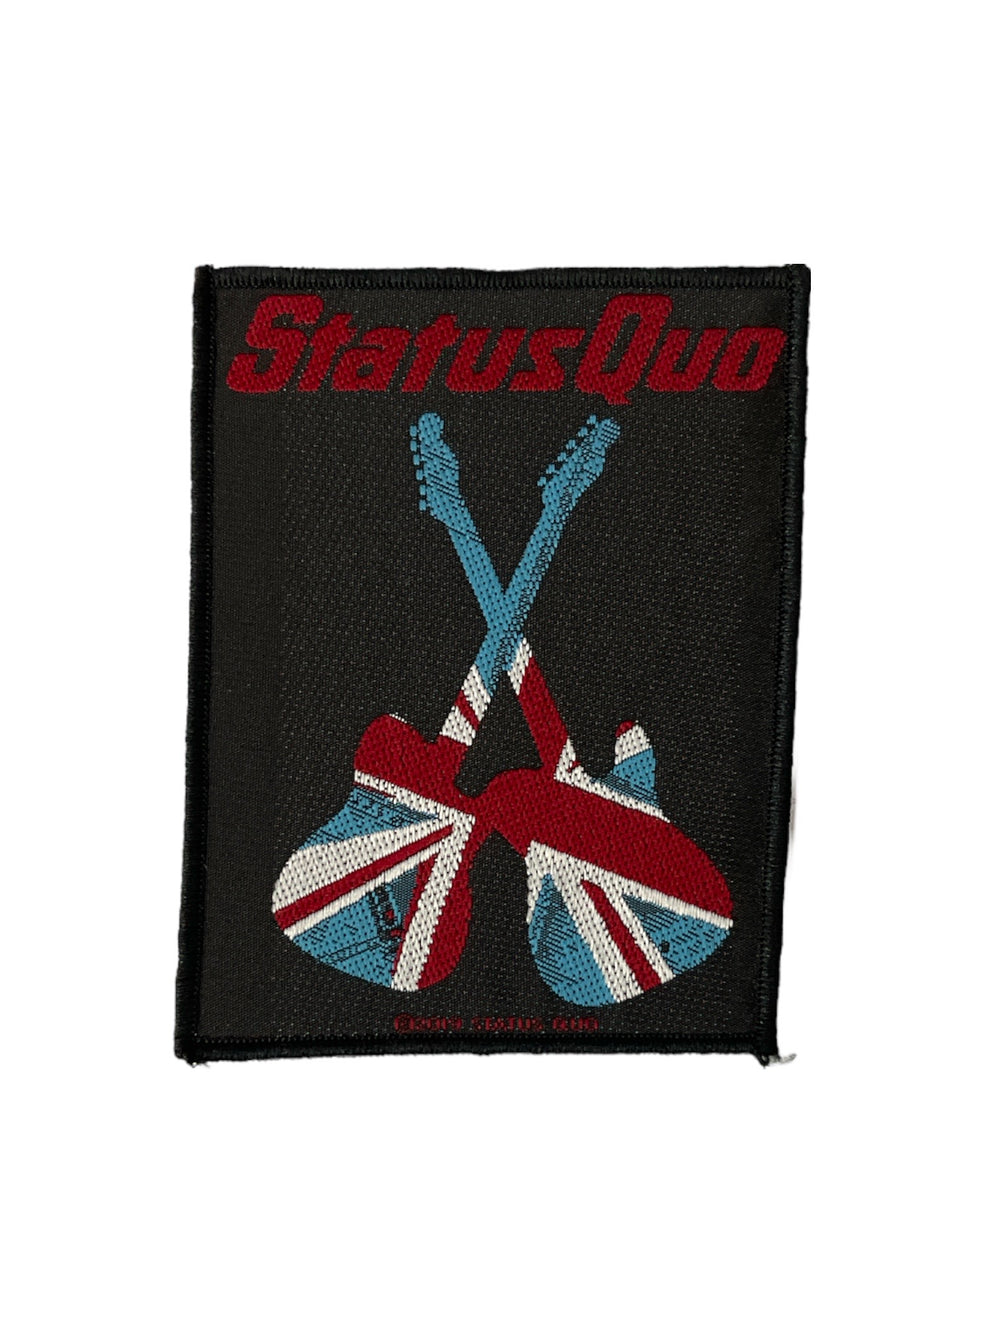 Status Quo Union Guitars Official Woven Patch Brand New